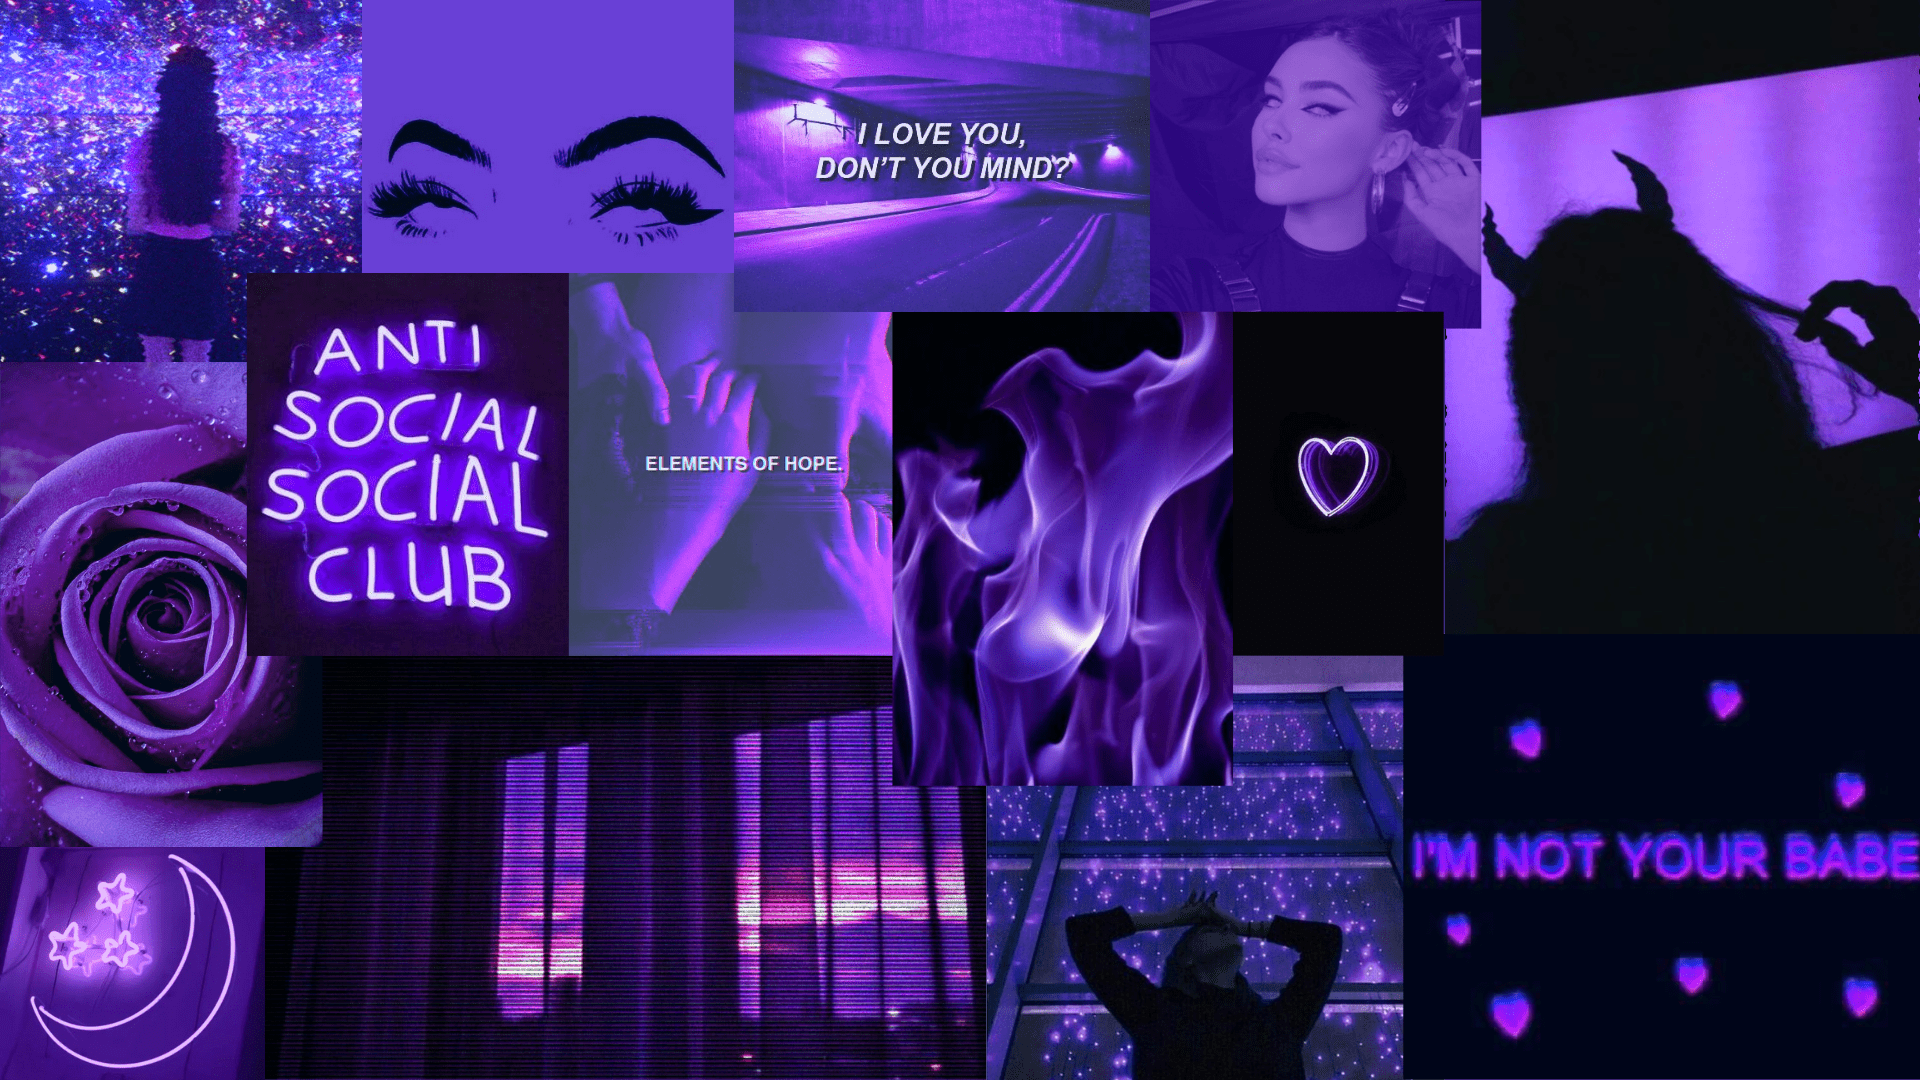 A collage of purple images with the words anti social club - Neon purple, purple